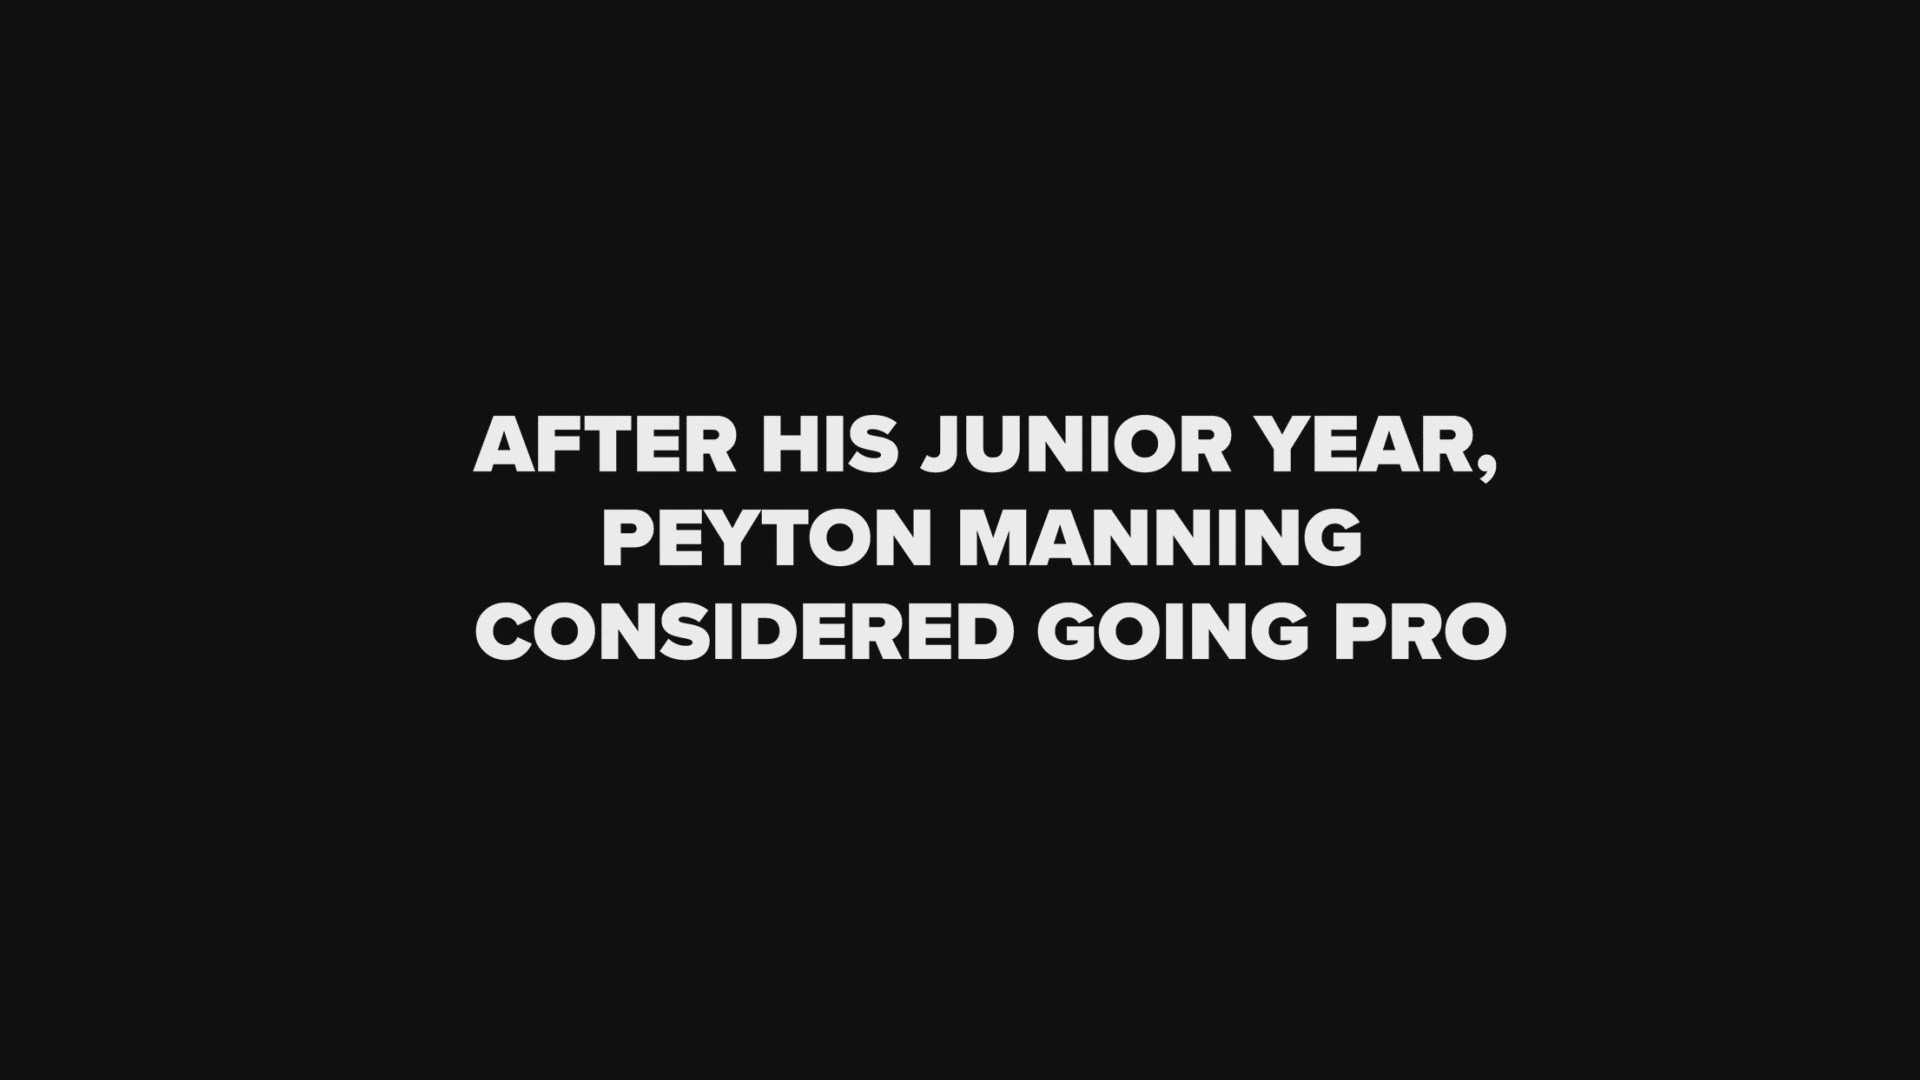 WBIR revisits Peyton Manning's decision to stay at Tennessee for his senior year with a mini-documentary featuring behind the scenes stories from Peyton, Phillip Fulmer and David Cutcliffe. Manning calls it one of the best decisions he's ever made in his